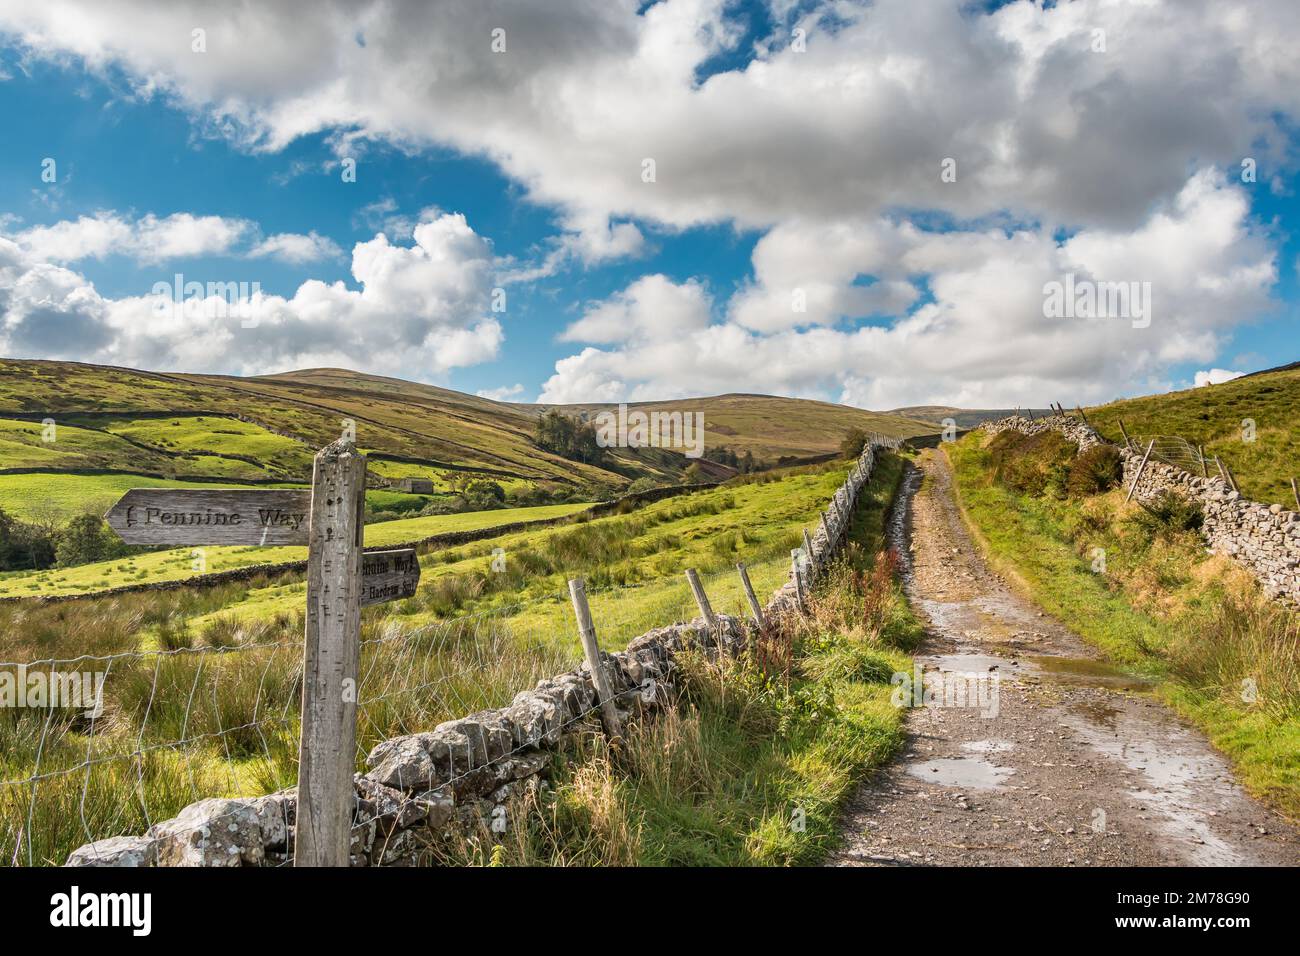 The Pennine Way long distance footpath at Thwaite, Swaledale Stock Photo